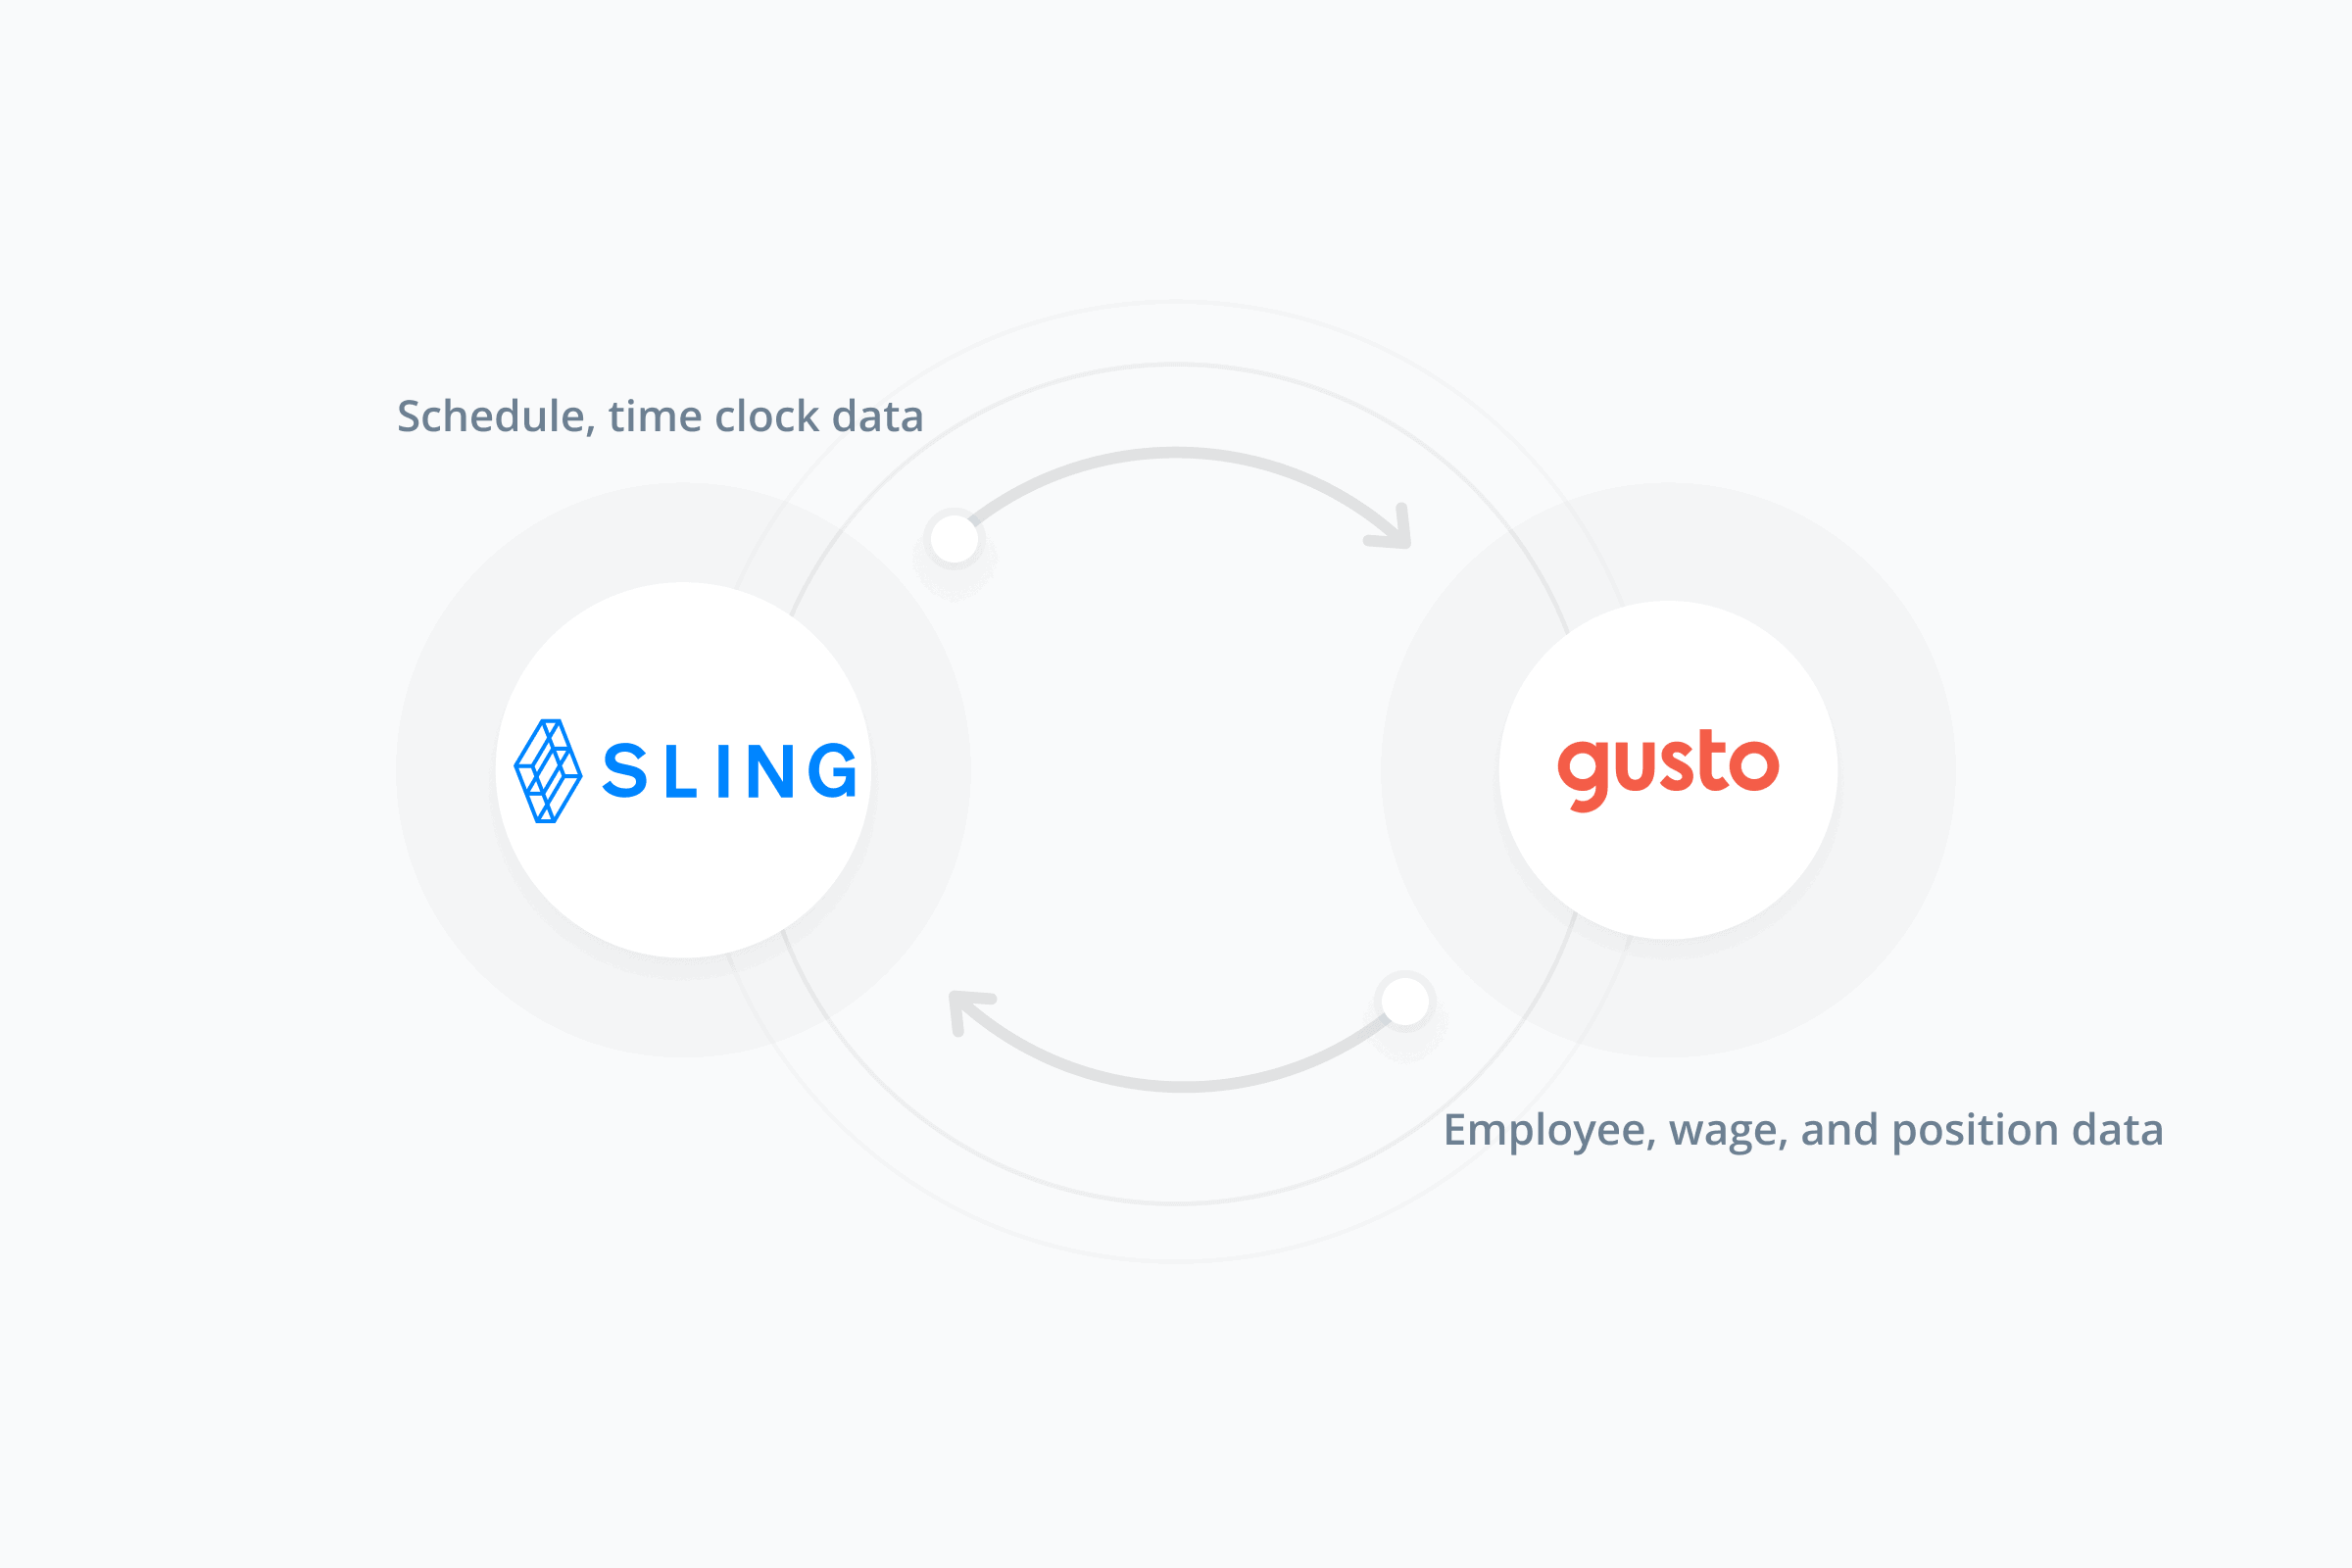 Sling scheduling app integrates with Gusto payroll app